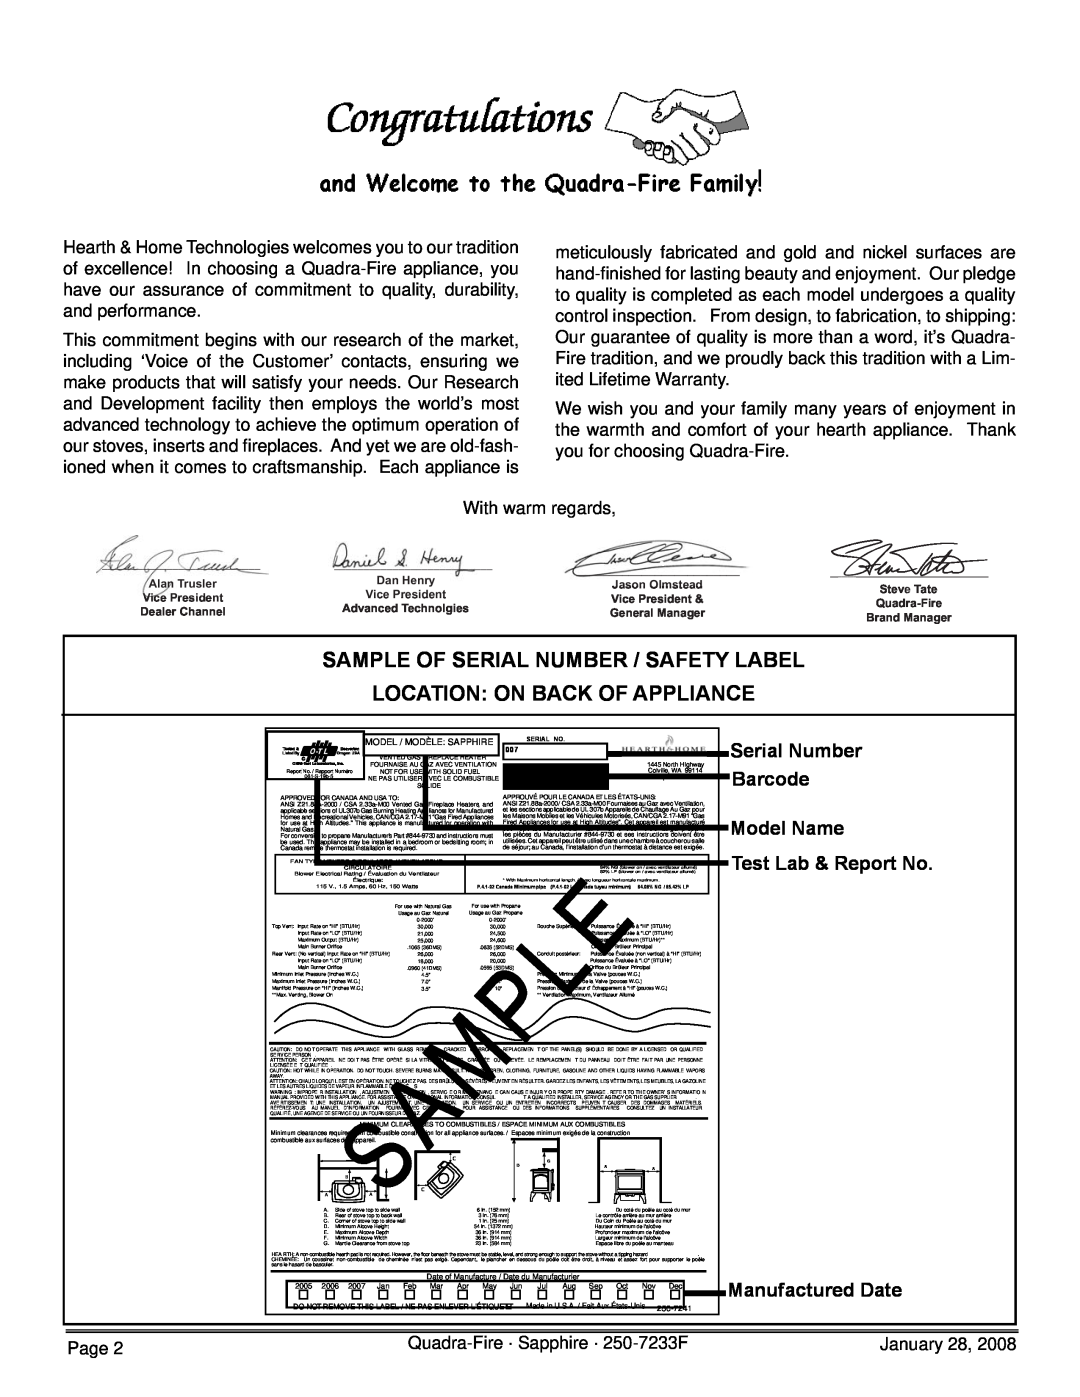 Quadra-Fire 839-1390, 839-1460 Sample Of Serial Number / Safety Label Location On Back Of Appliance, Manufactured Date 